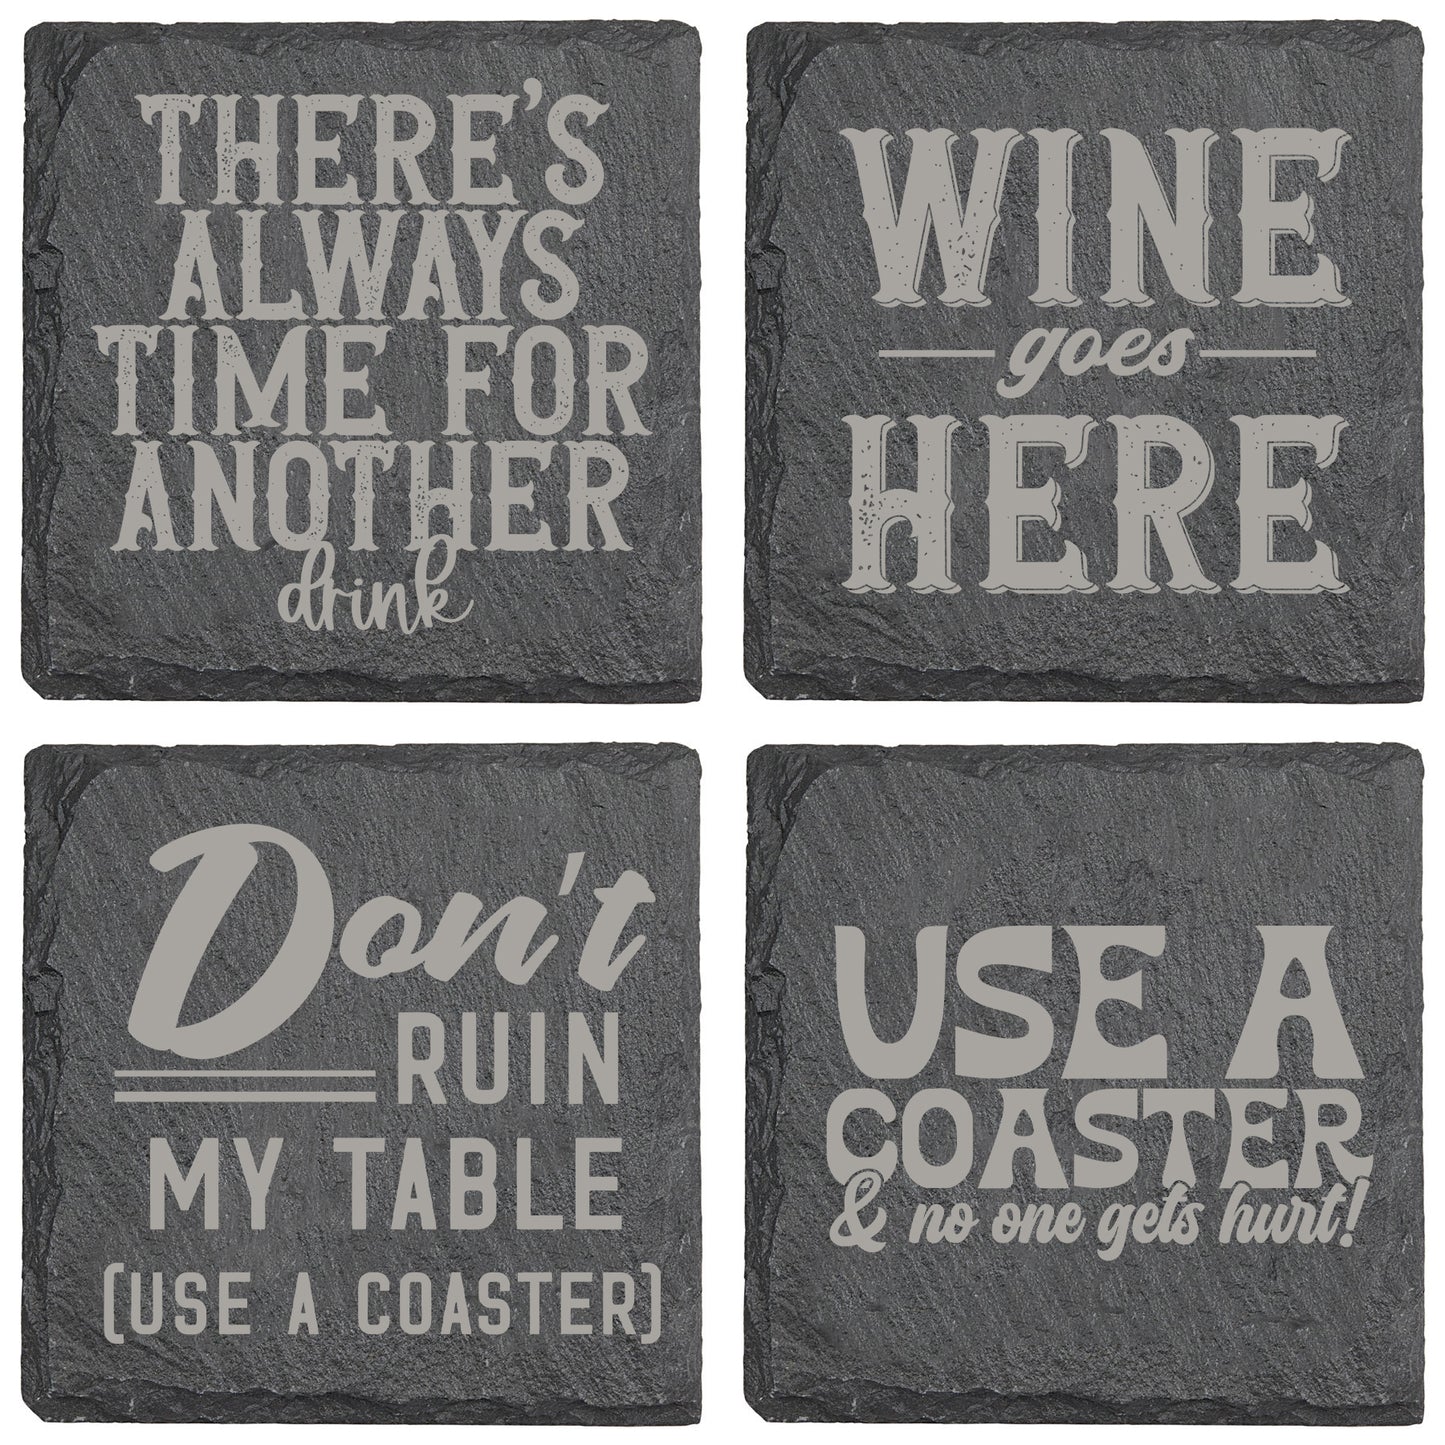 There's Always Time Slate Coaster